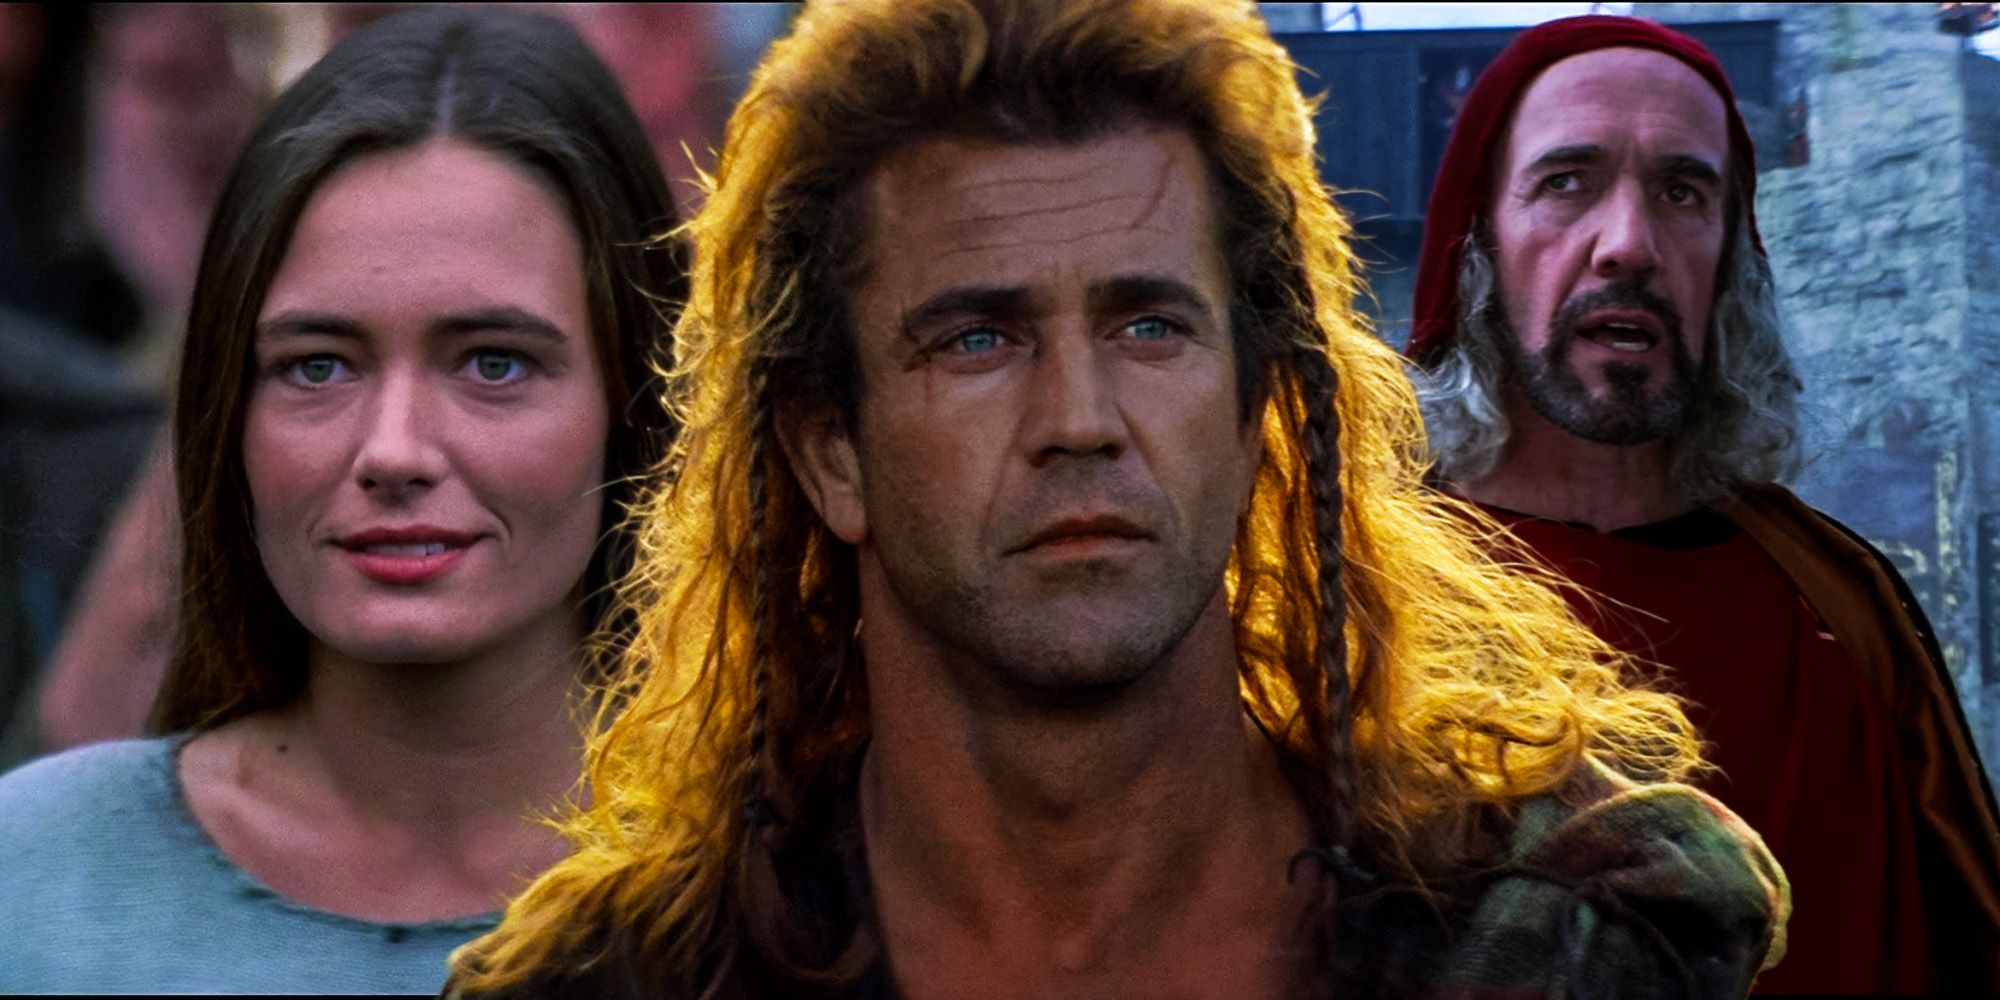 A blended image features characters from Braveheart